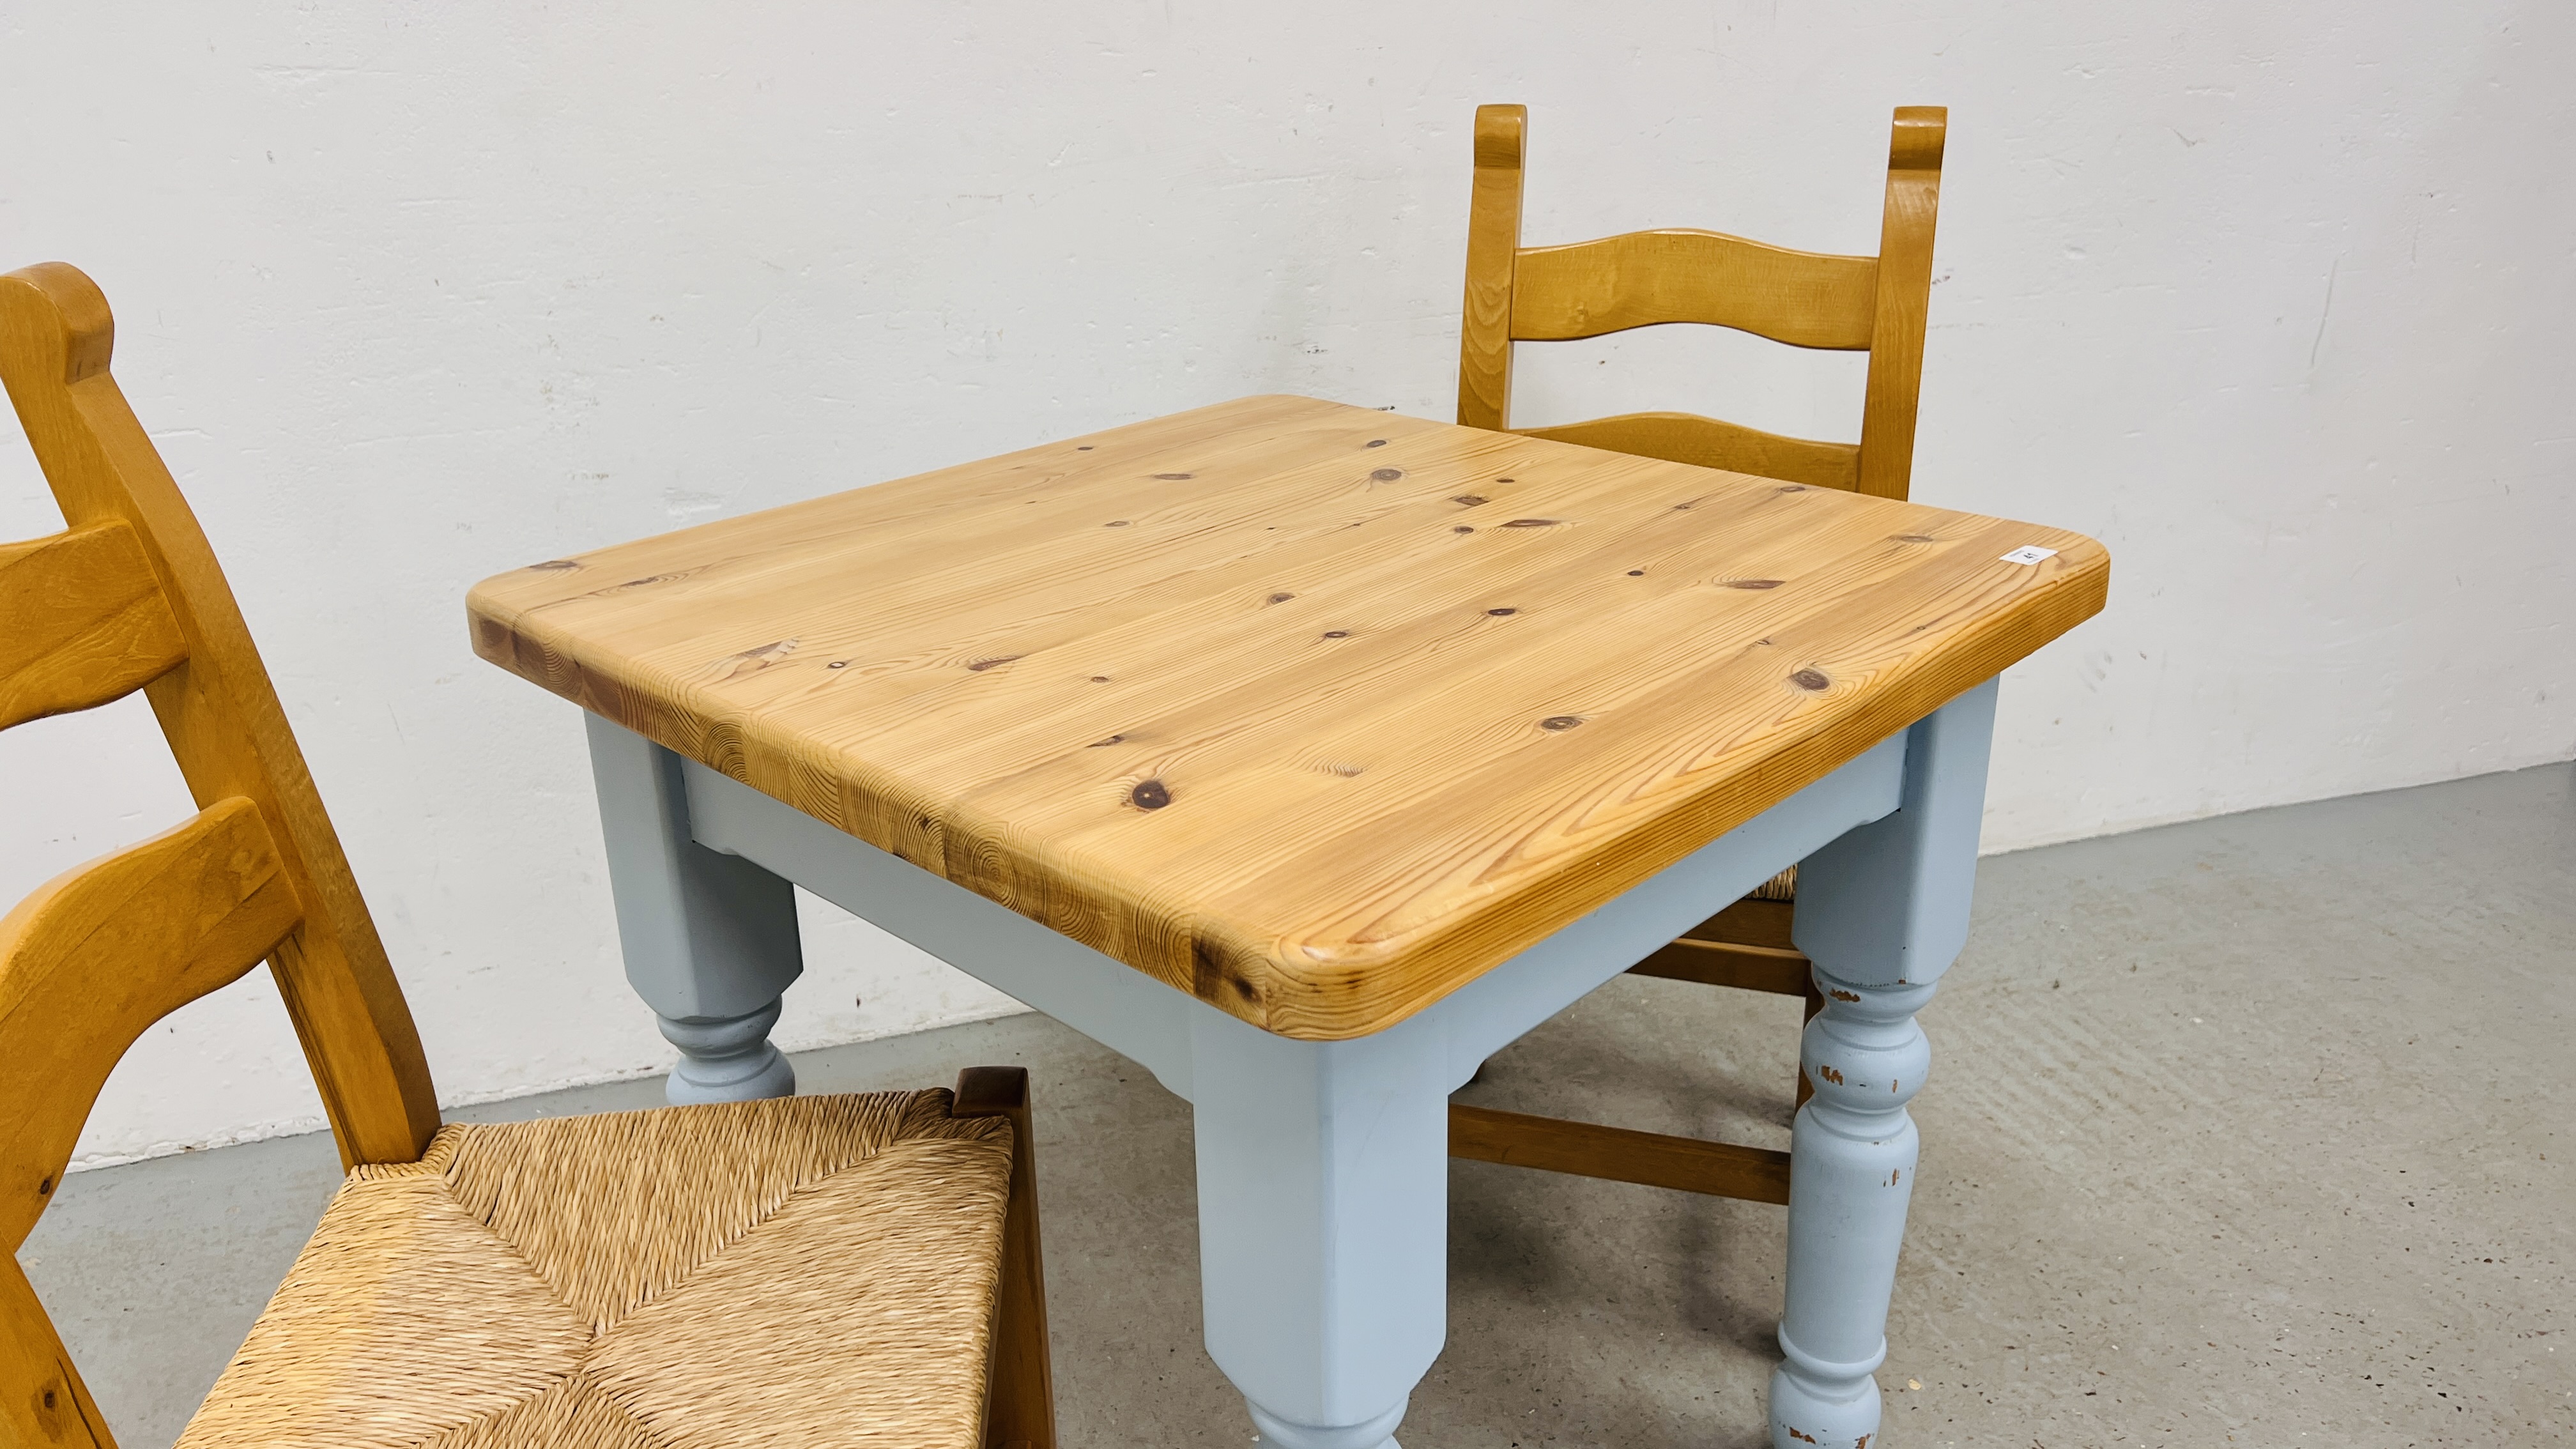 A SOLID PINE BREAKFAST TABLE WITH NATURAL WAXED FINISH TOP AND TWO SOLID BEECHWOOD DINING CHAIRS - Image 8 of 8